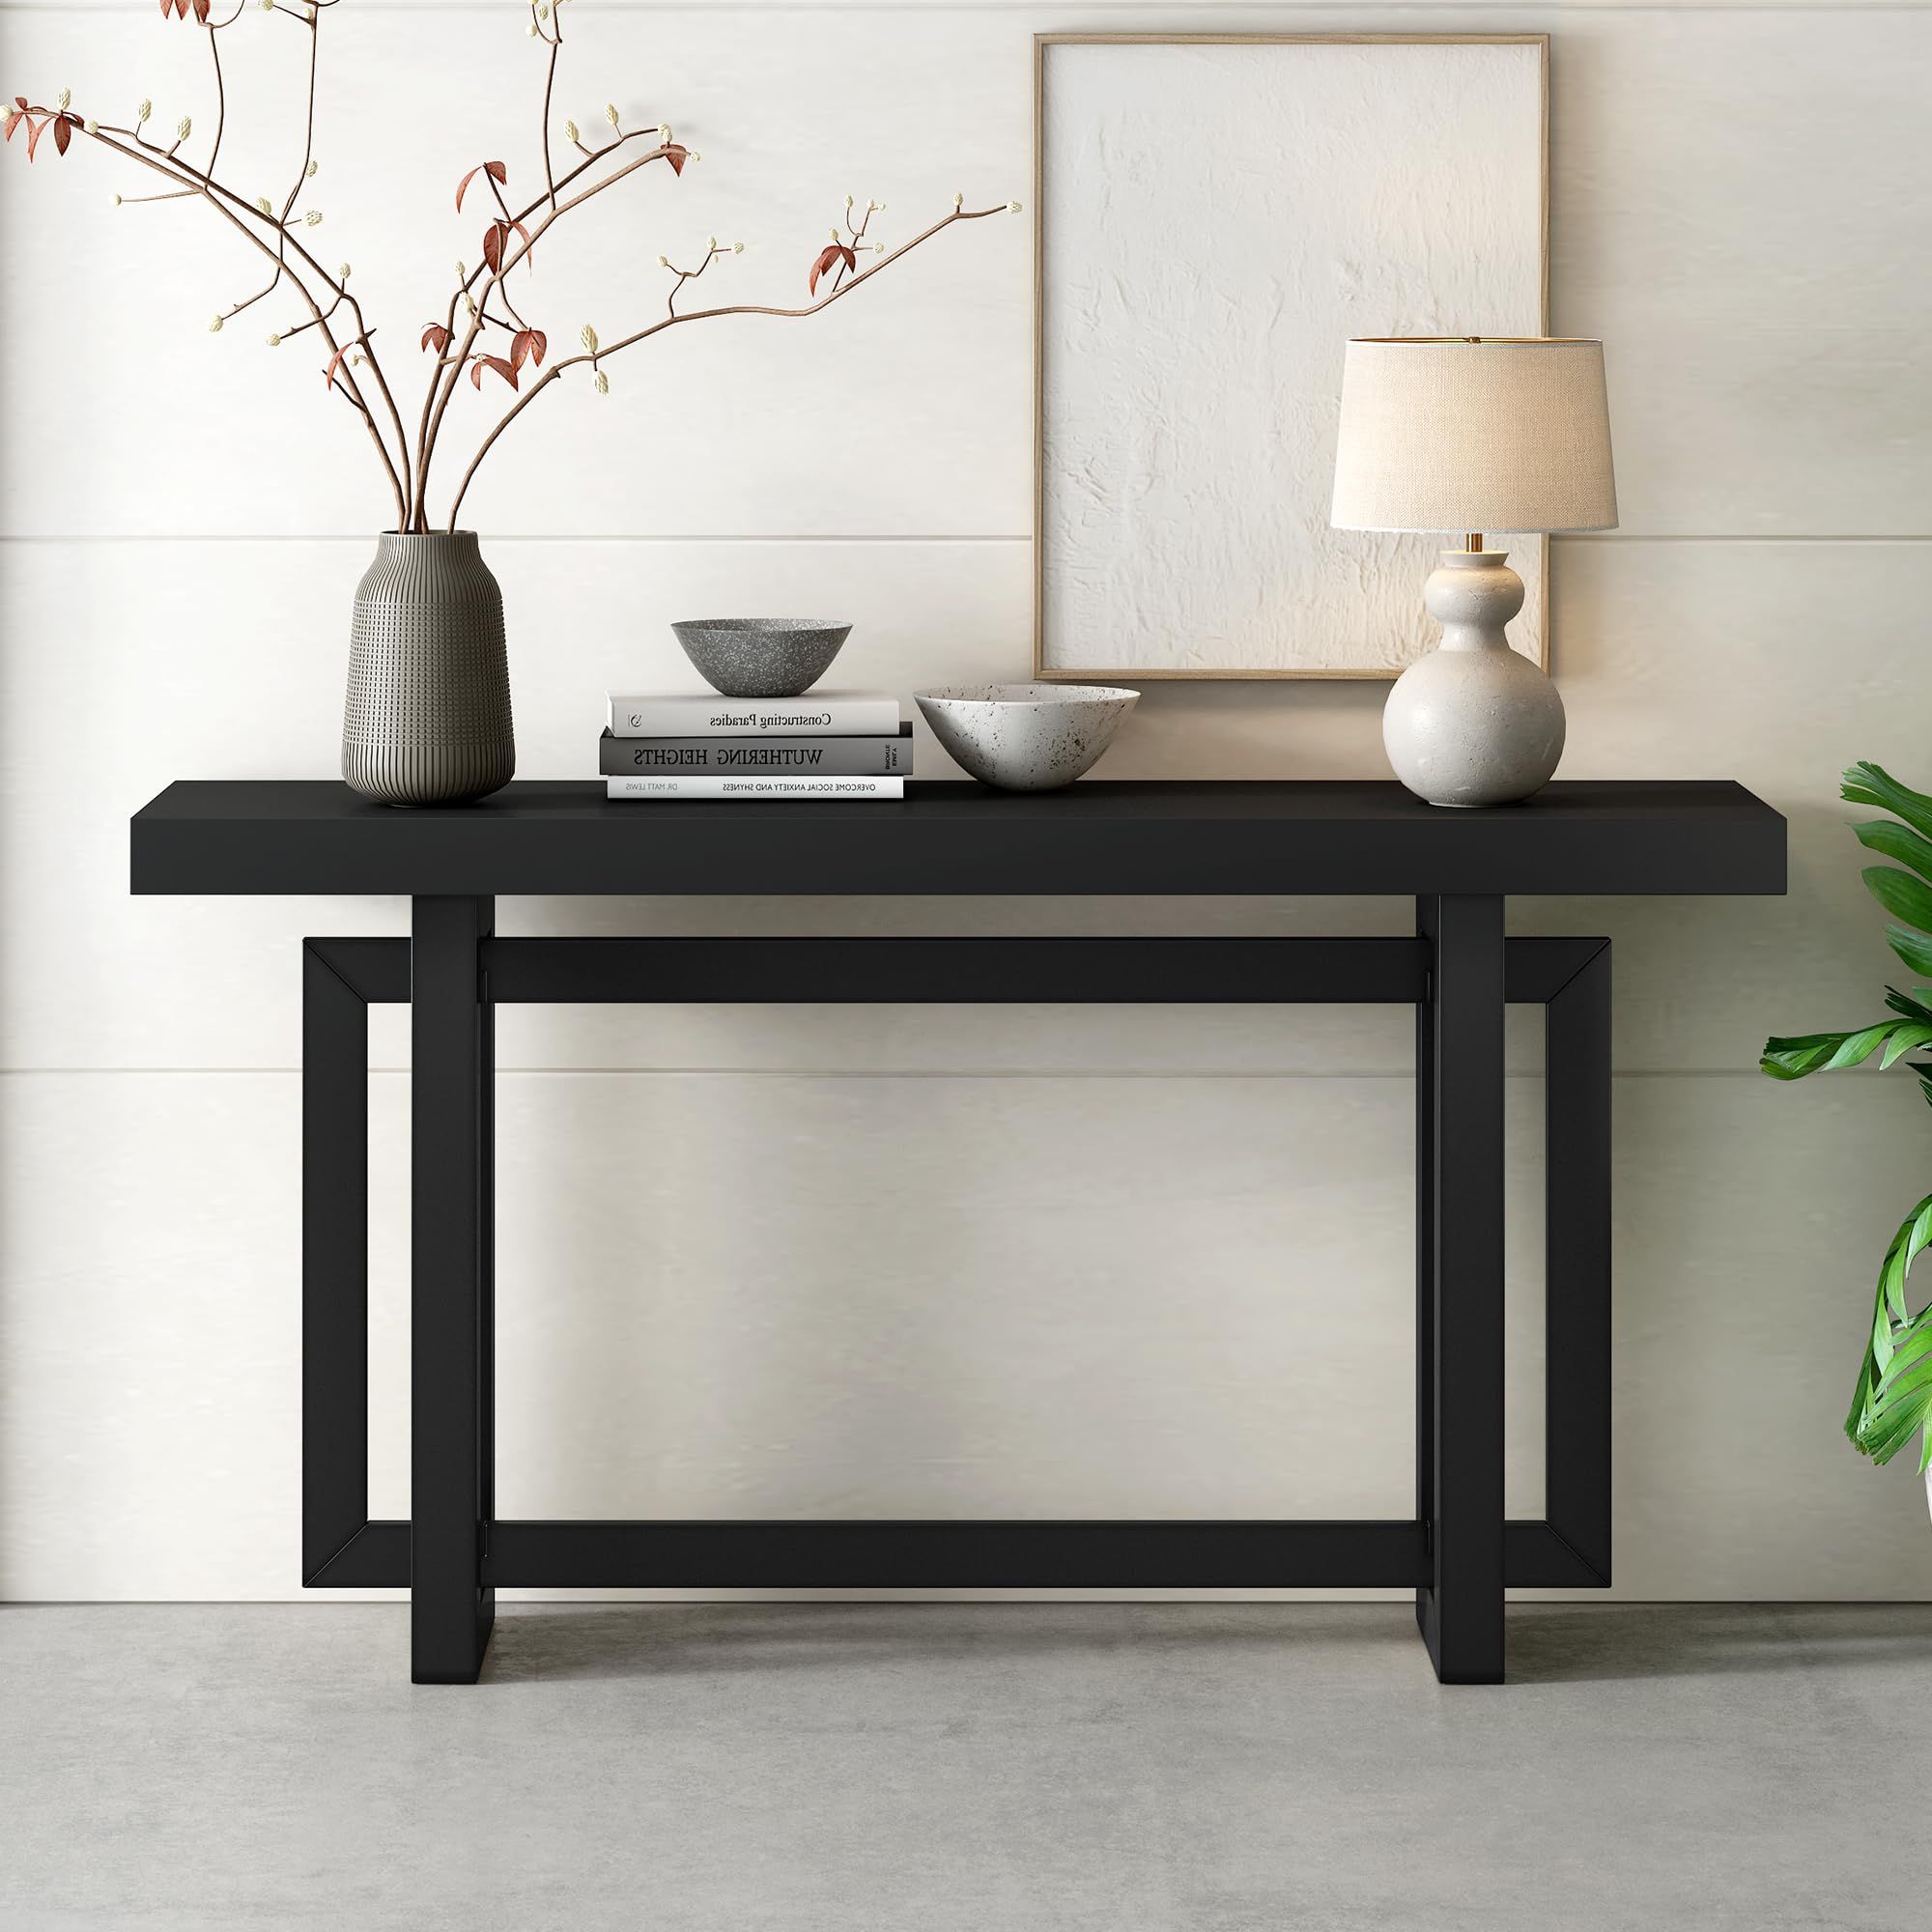 Contemporary Console Table with Industrial-Inspired Concrete Wood Top, Wood Legs, Extra Long Entryway Table for Entryway, Hallway, Living Room, Foyer, Corridor (Black) | Amazon (US)